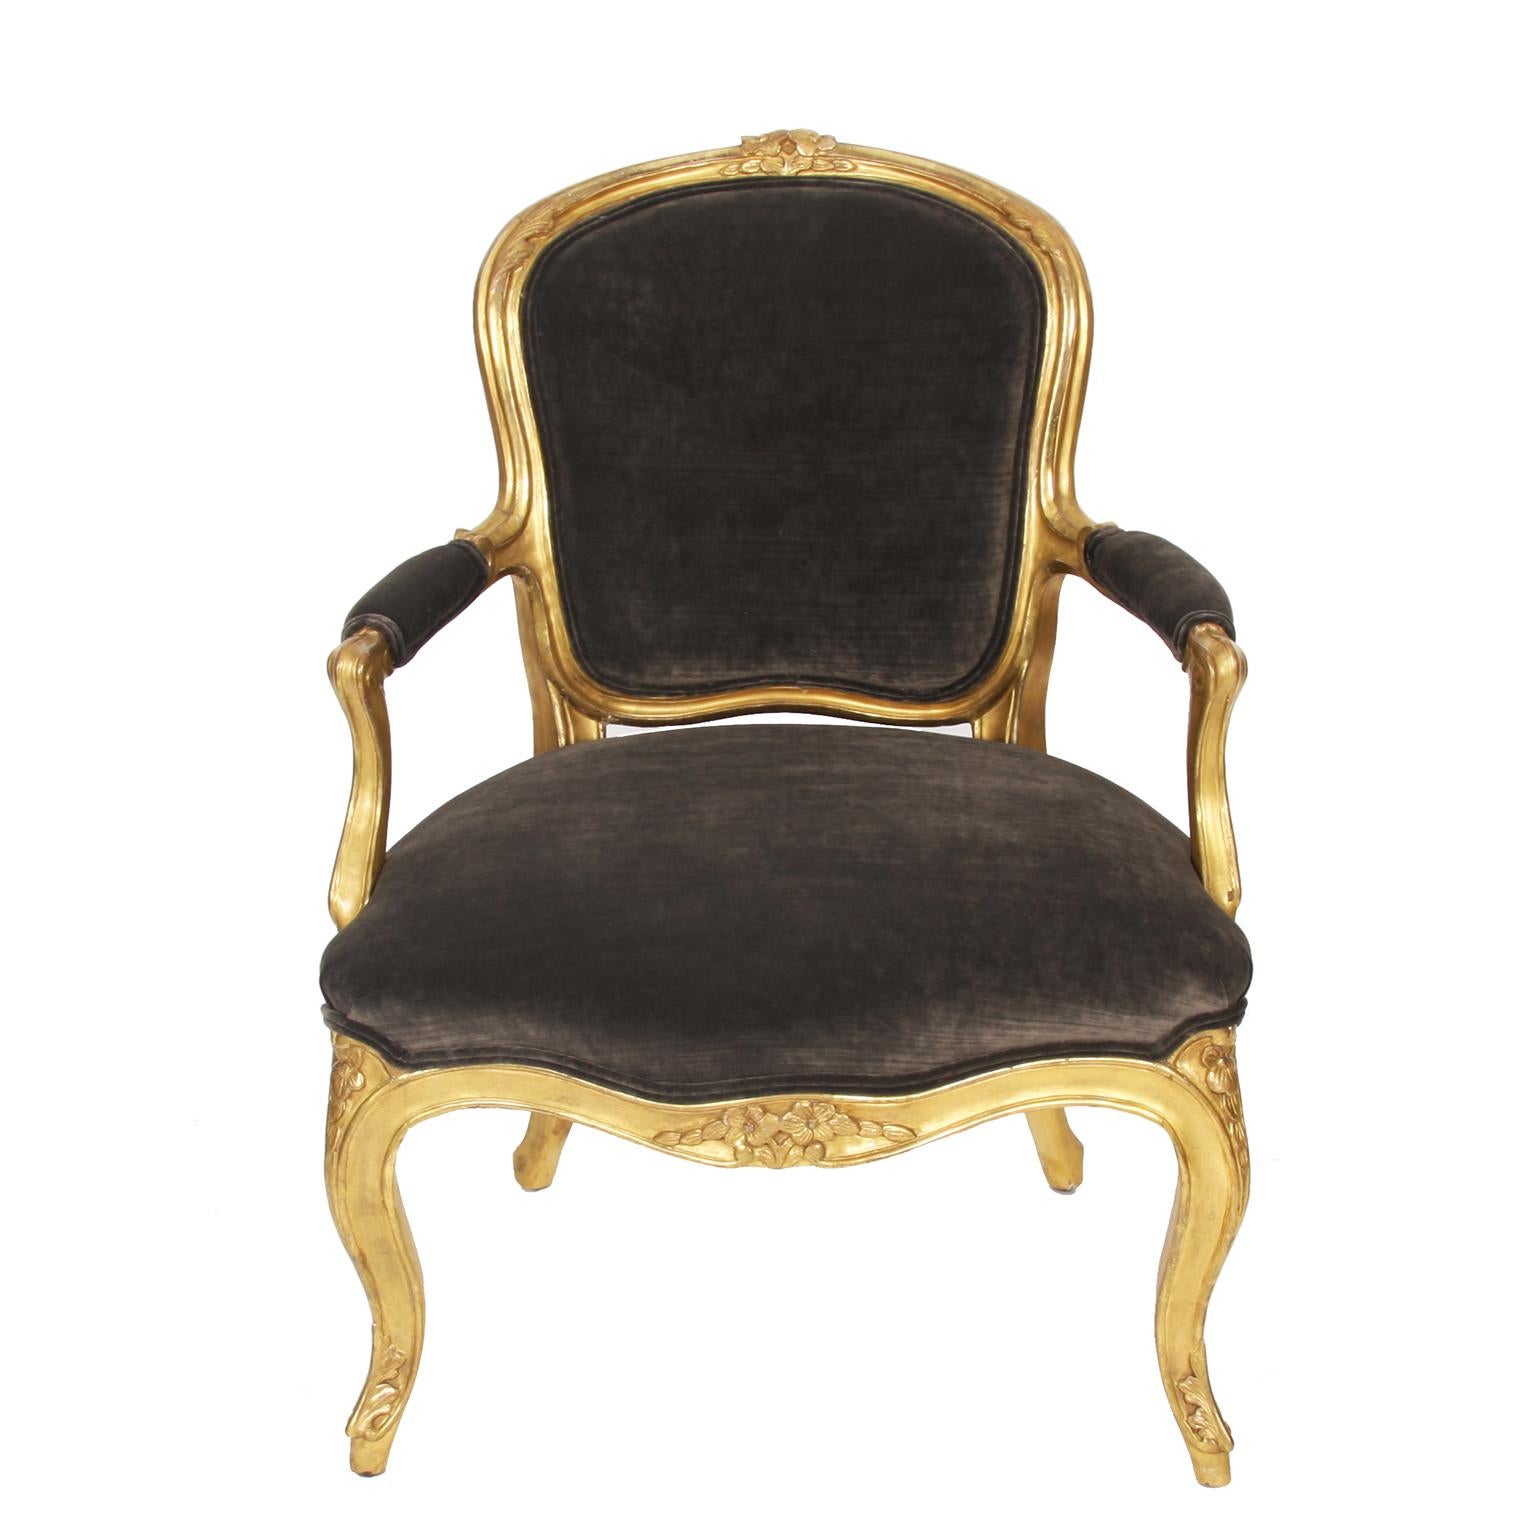 French, 19th century

A splendid pair of giltwood salon chairs, covered in grey velvet. Beautiful floral detailing to the frames. 

Seat height: 46cm

In good condition.